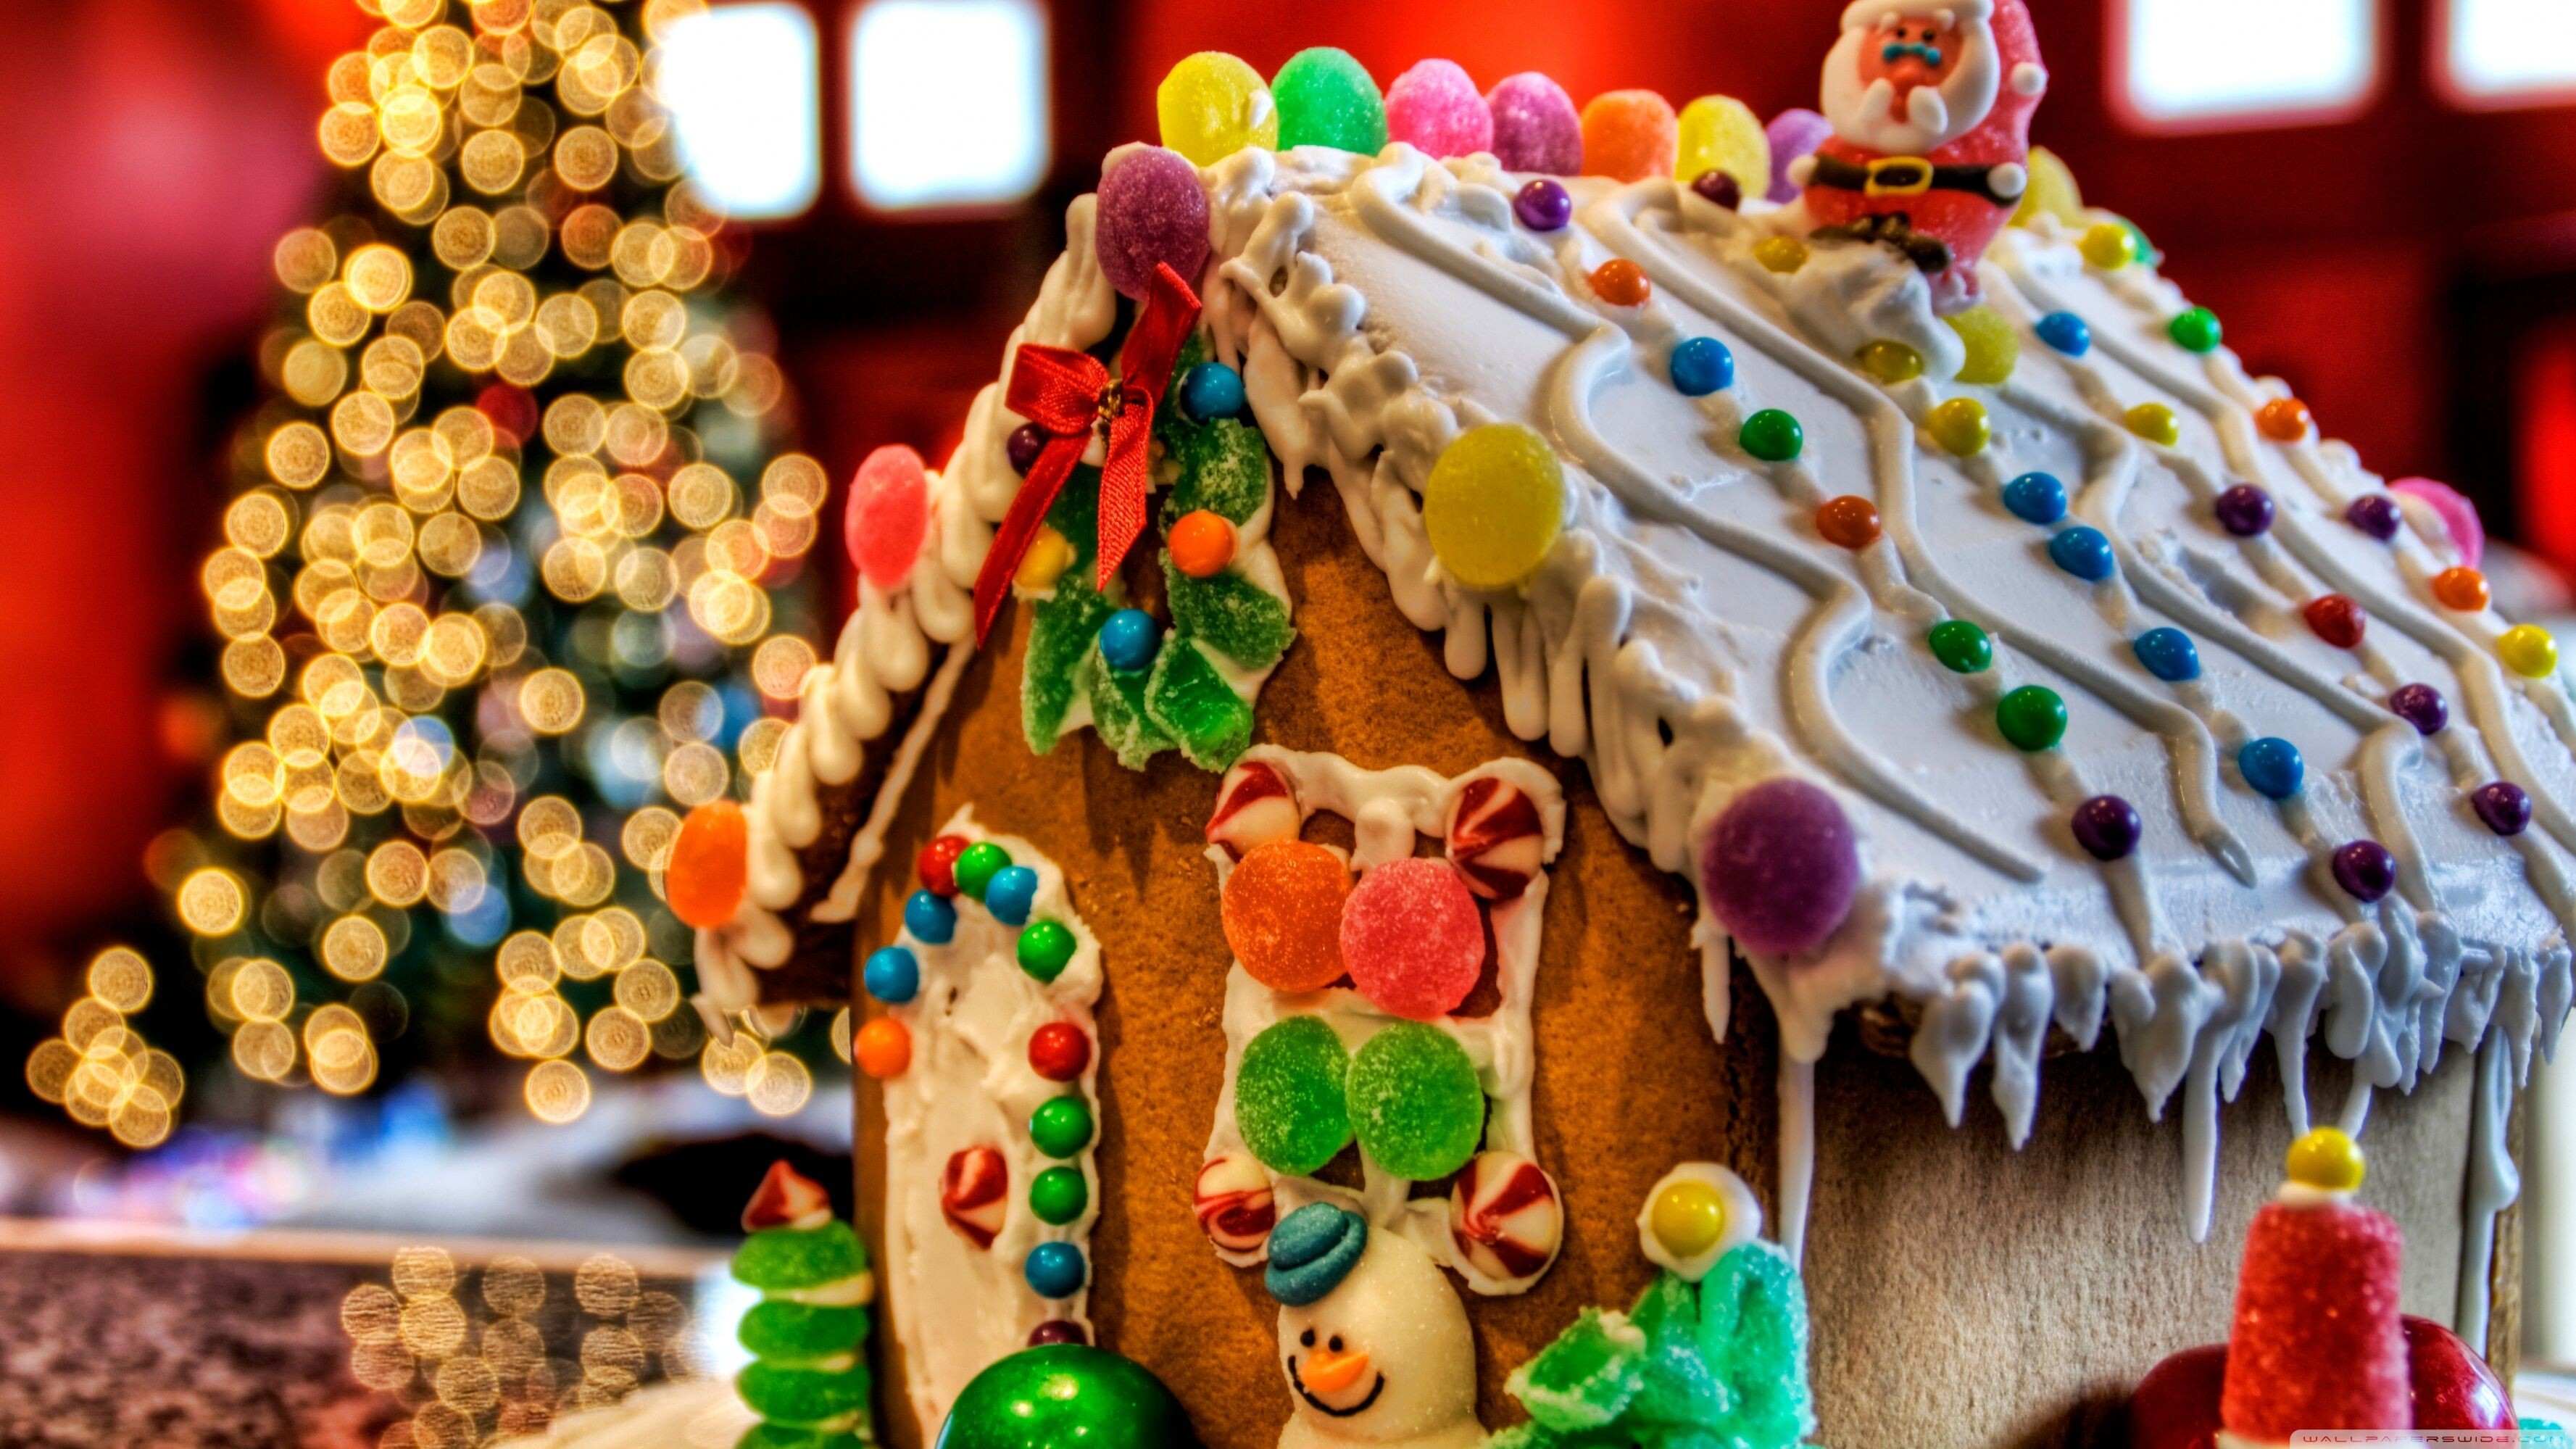 Gingerbread House: Christmas cookies, Candy decorations, Gumdrops, Jelly beans, Coating of powdered sugar snow. 3560x2000 HD Background.